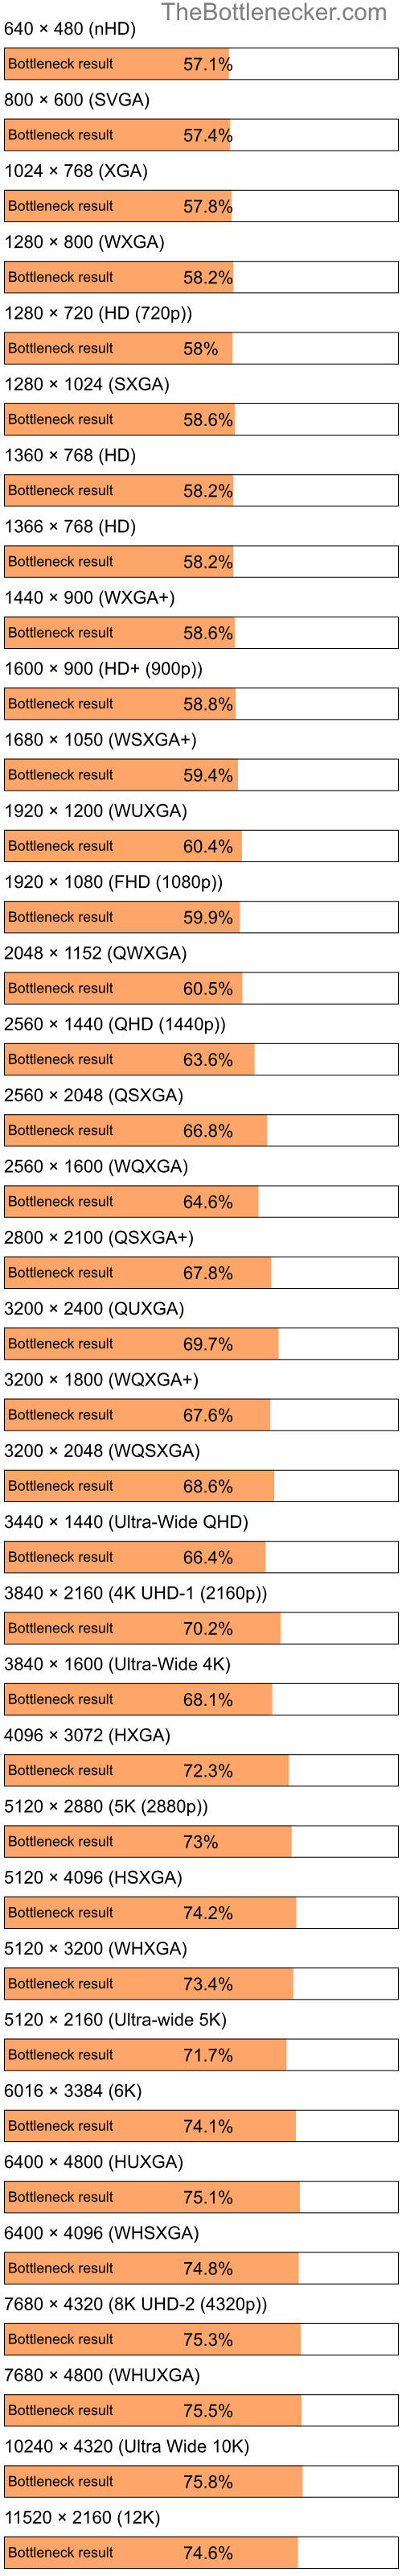 Bottleneck results by resolution for Intel Pentium 4 and NVIDIA Quadro FX 540 in Processor Intense Tasks